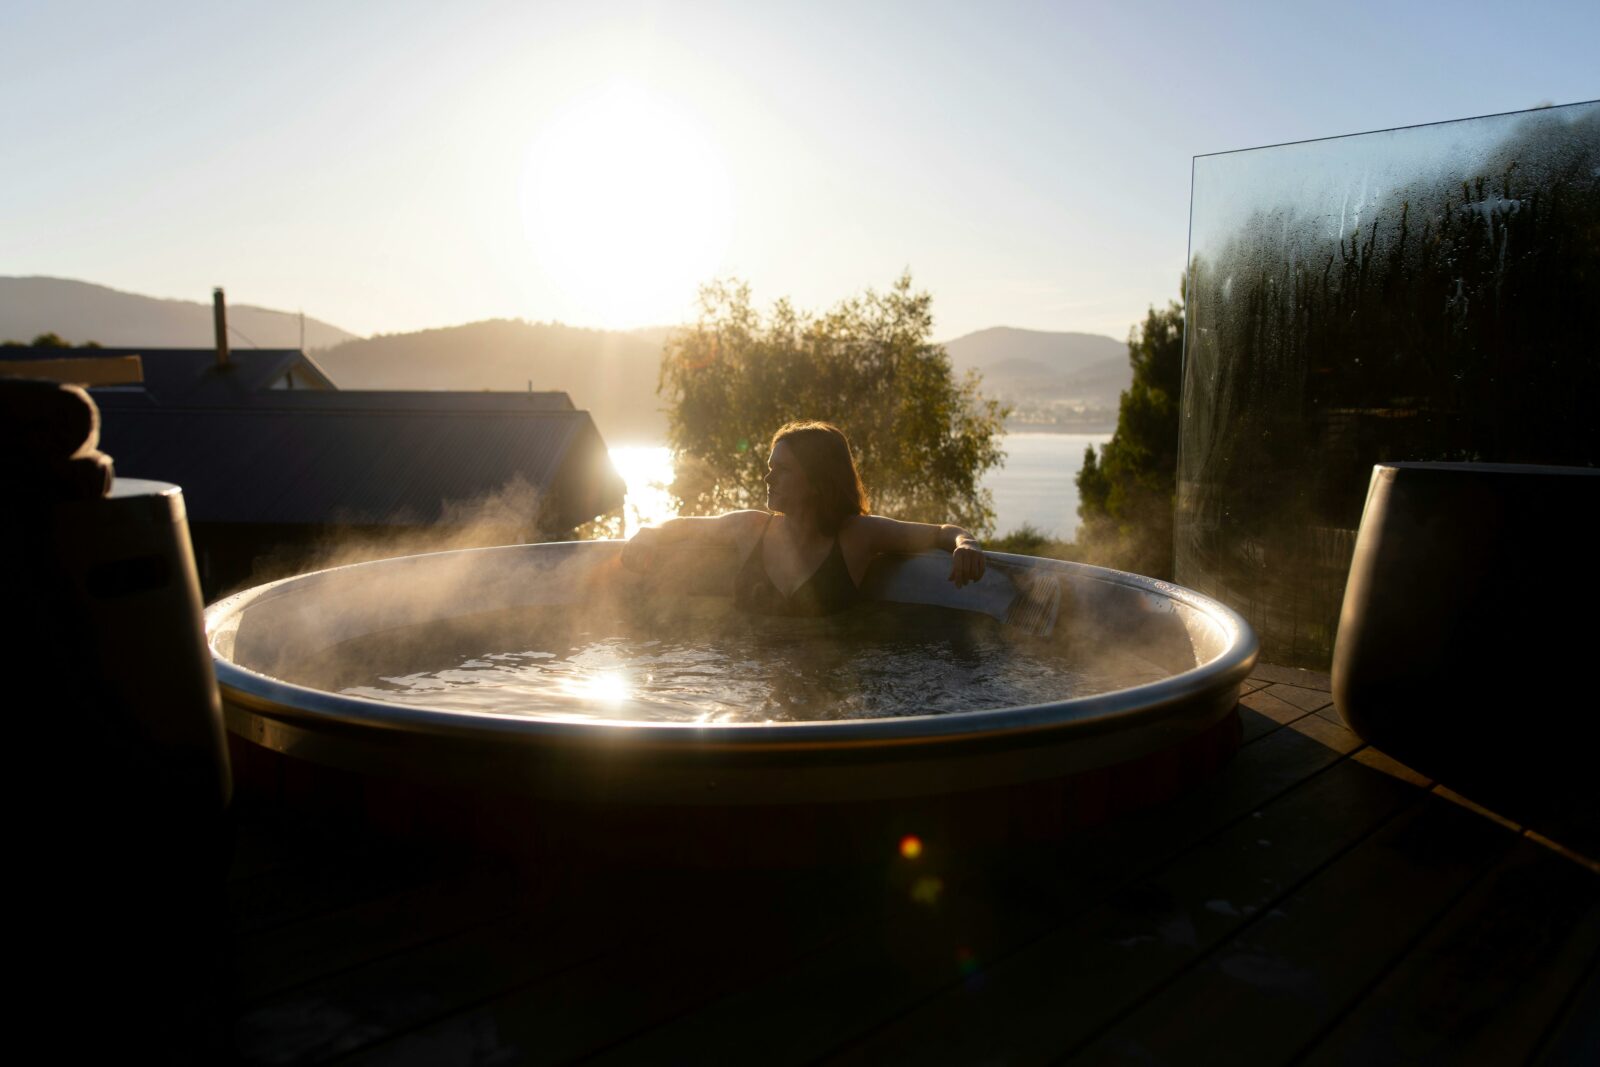 Photo of a person in a hot tub with a view over the bay